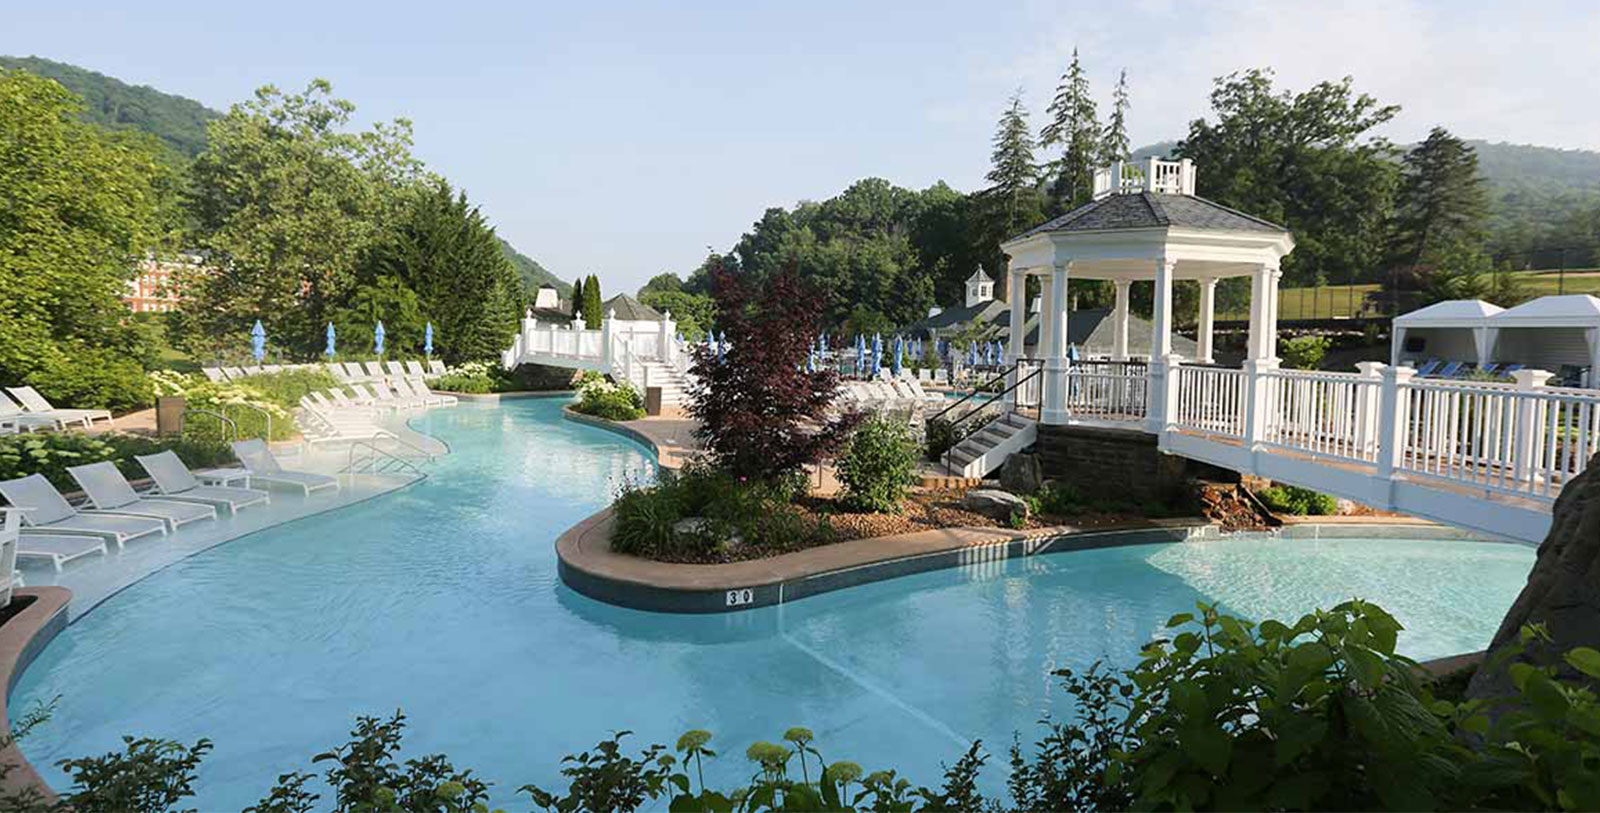 Explore the grounds of The Omni Homestead Resort while floating down a lazy river.